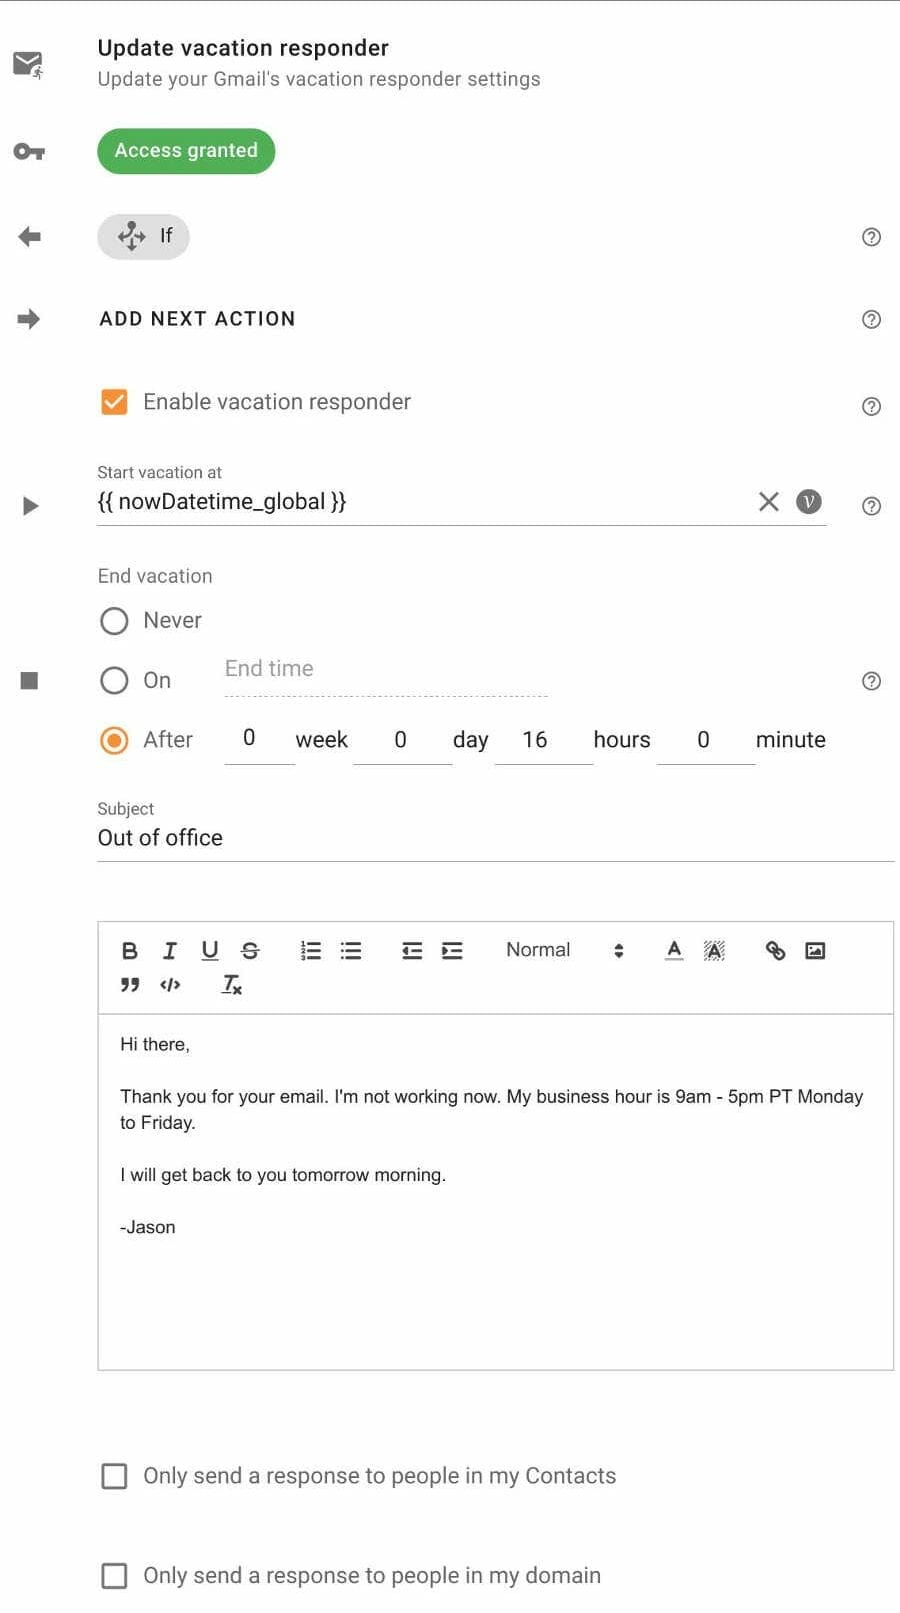 Edit Update vacation responder action in Foresight